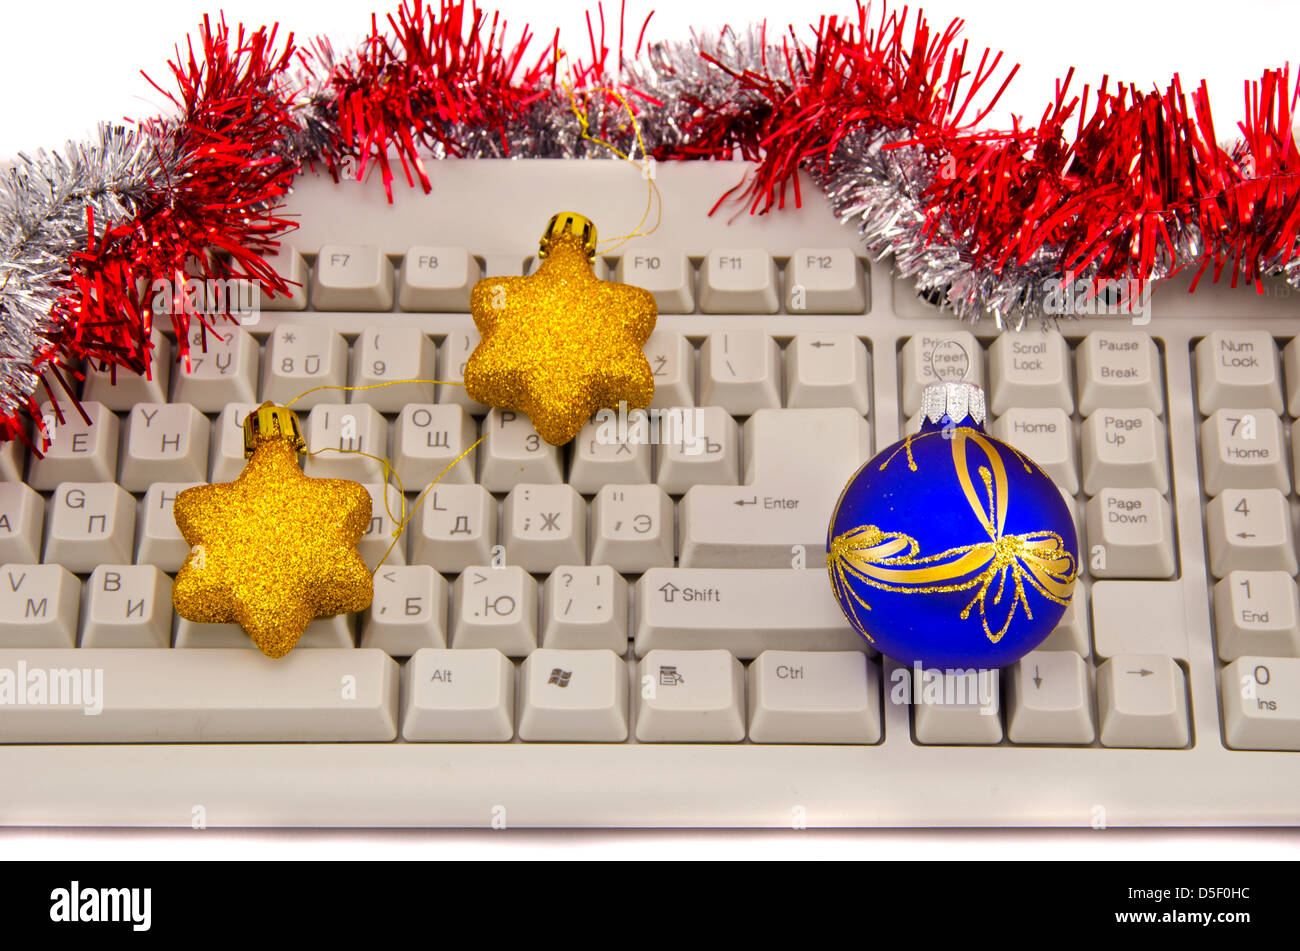 computer keyboard fragment with Christmas toys isolated  on white Stock Photo